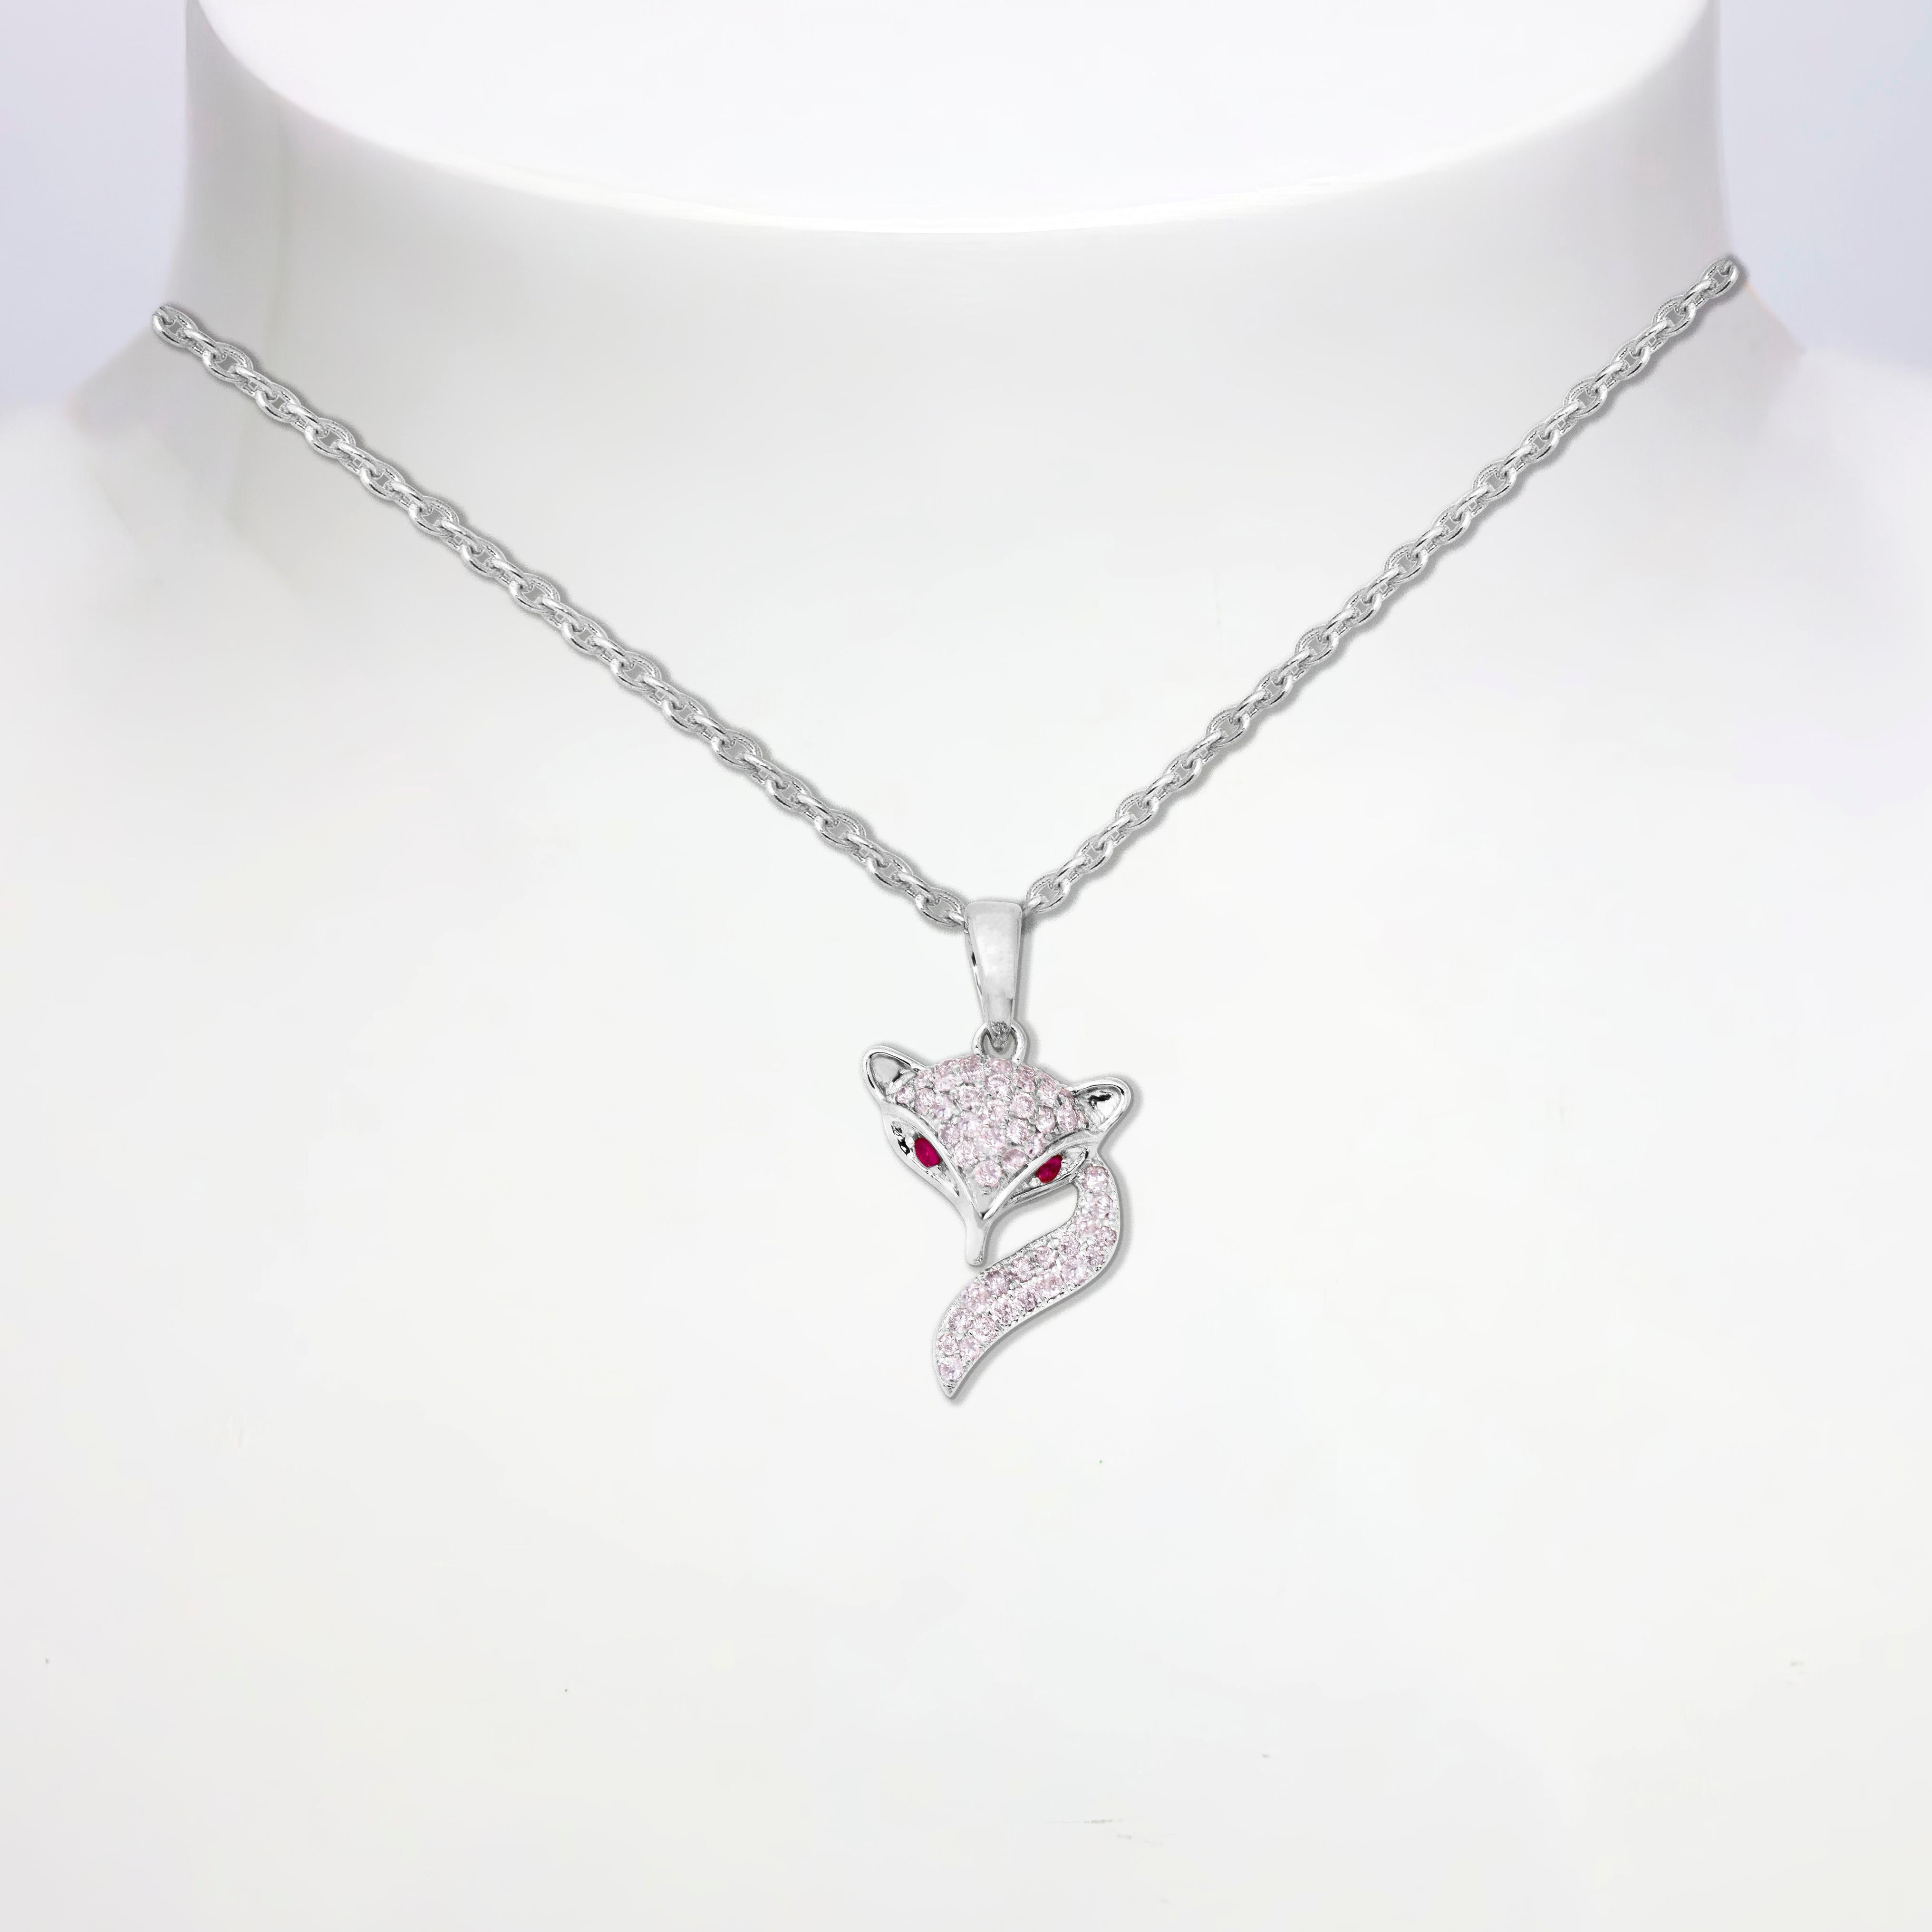 *IGI 14K 0.36 ct Natural Pink Diamonds Fox Design Pendant Necklace*

This band features a stunning design with a fox crafted from 14K white gold. It is set with natural pink diamonds weighing 0.36 carats.

This necklace features colorful natural